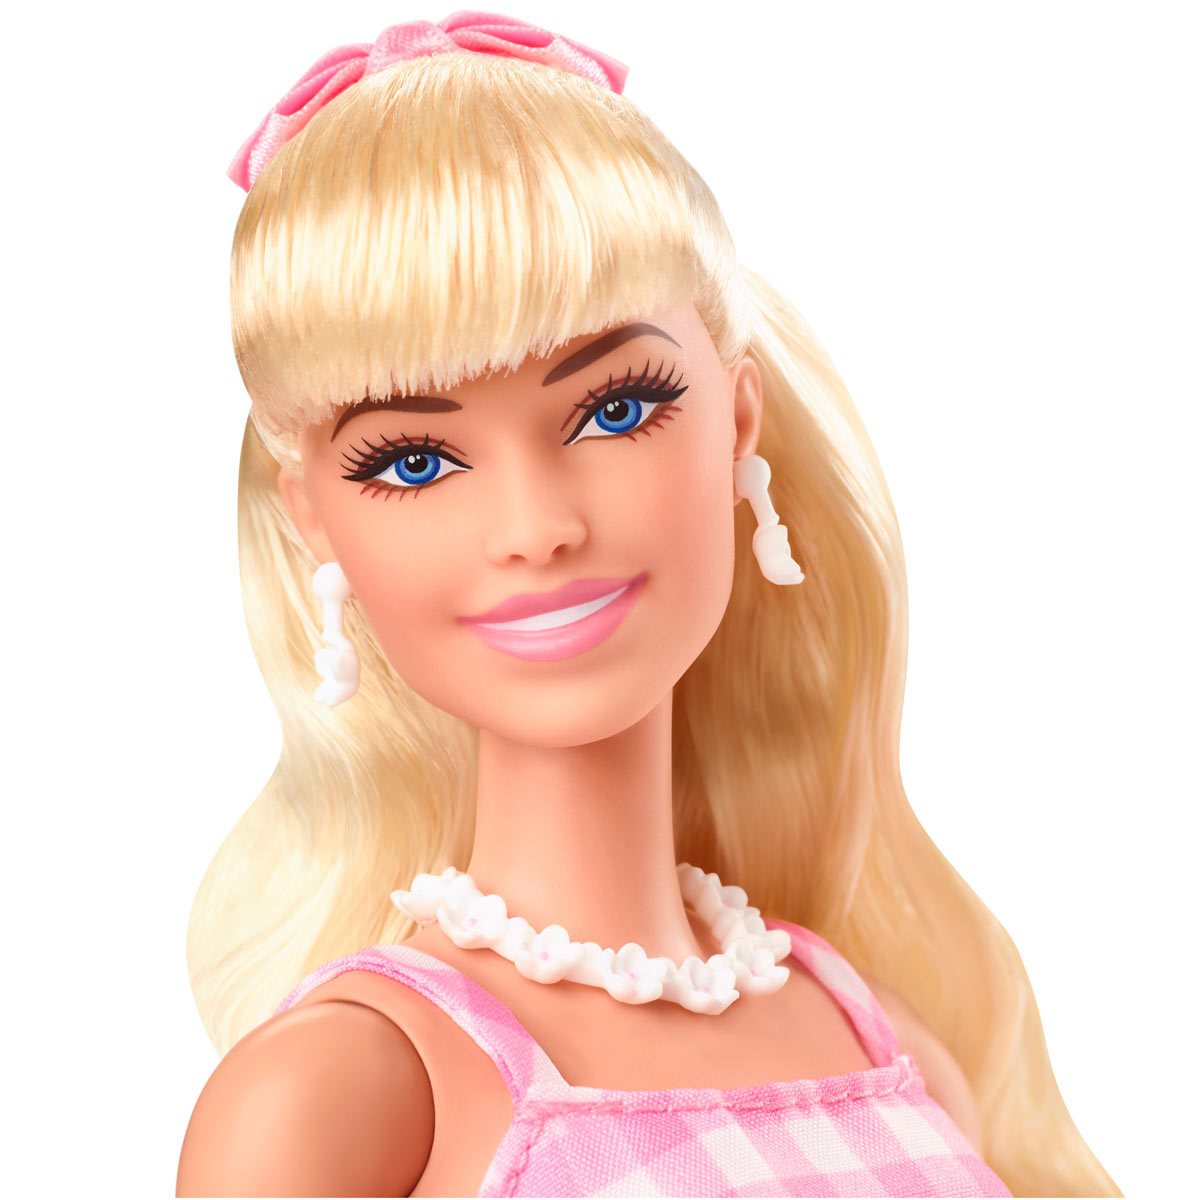 Mattel selling a Weird Barbie doll is antithetical to the whole Weird Barbie  aesthetic